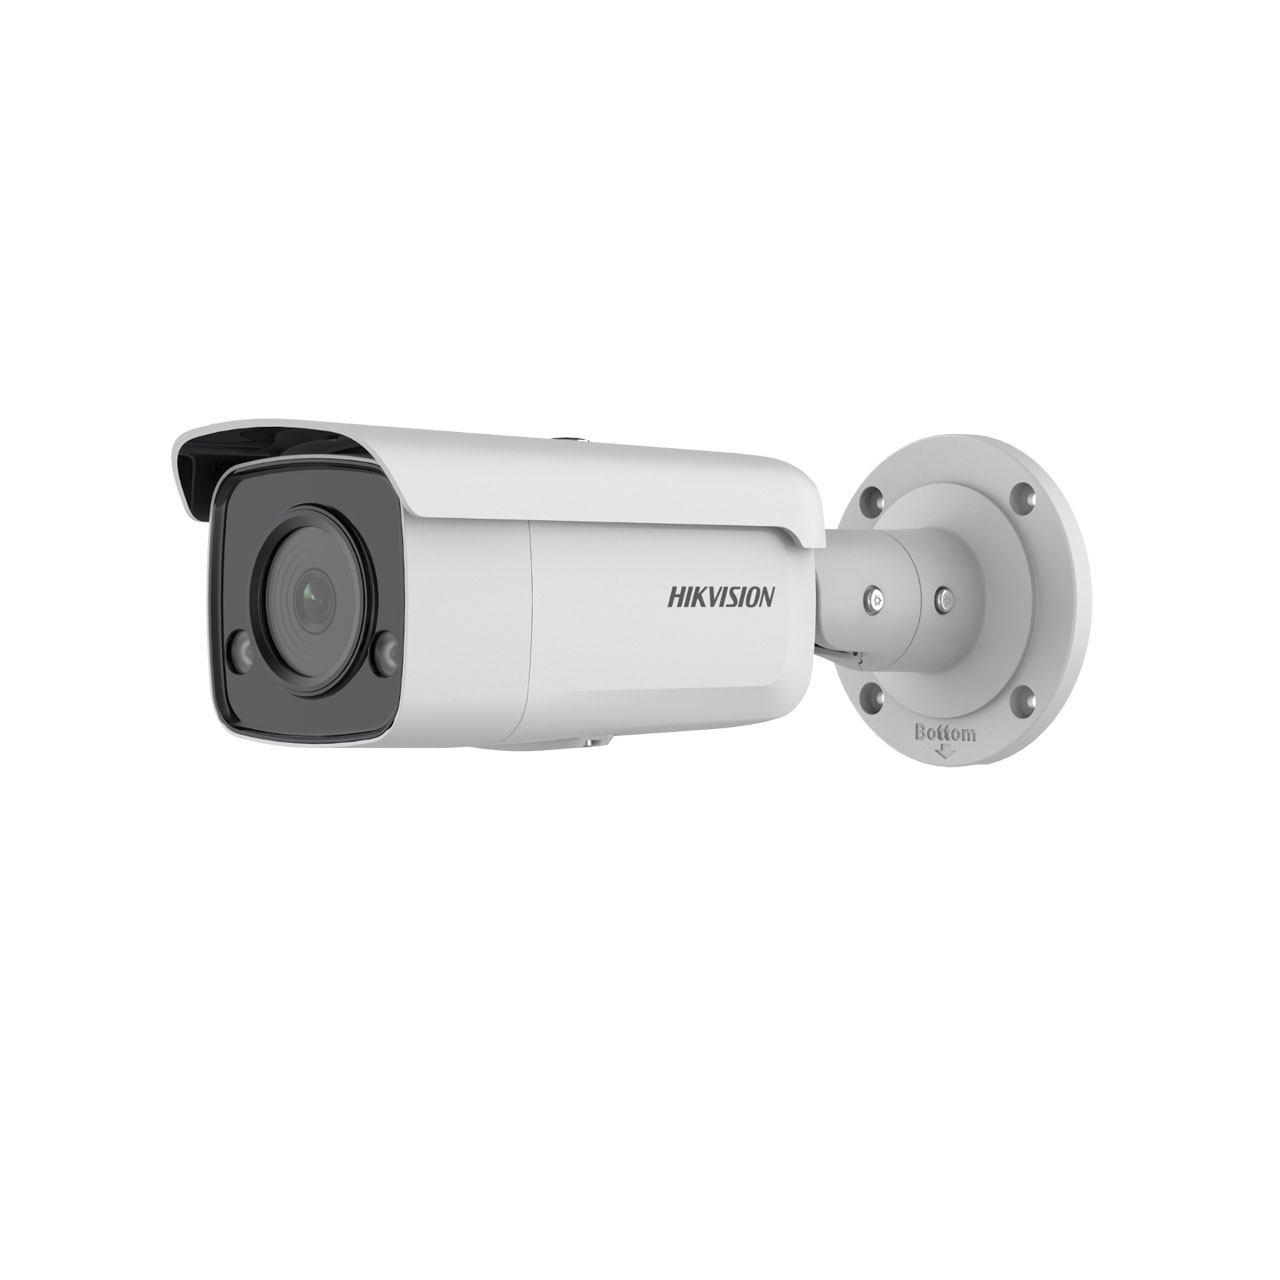 Gamme Hikvision